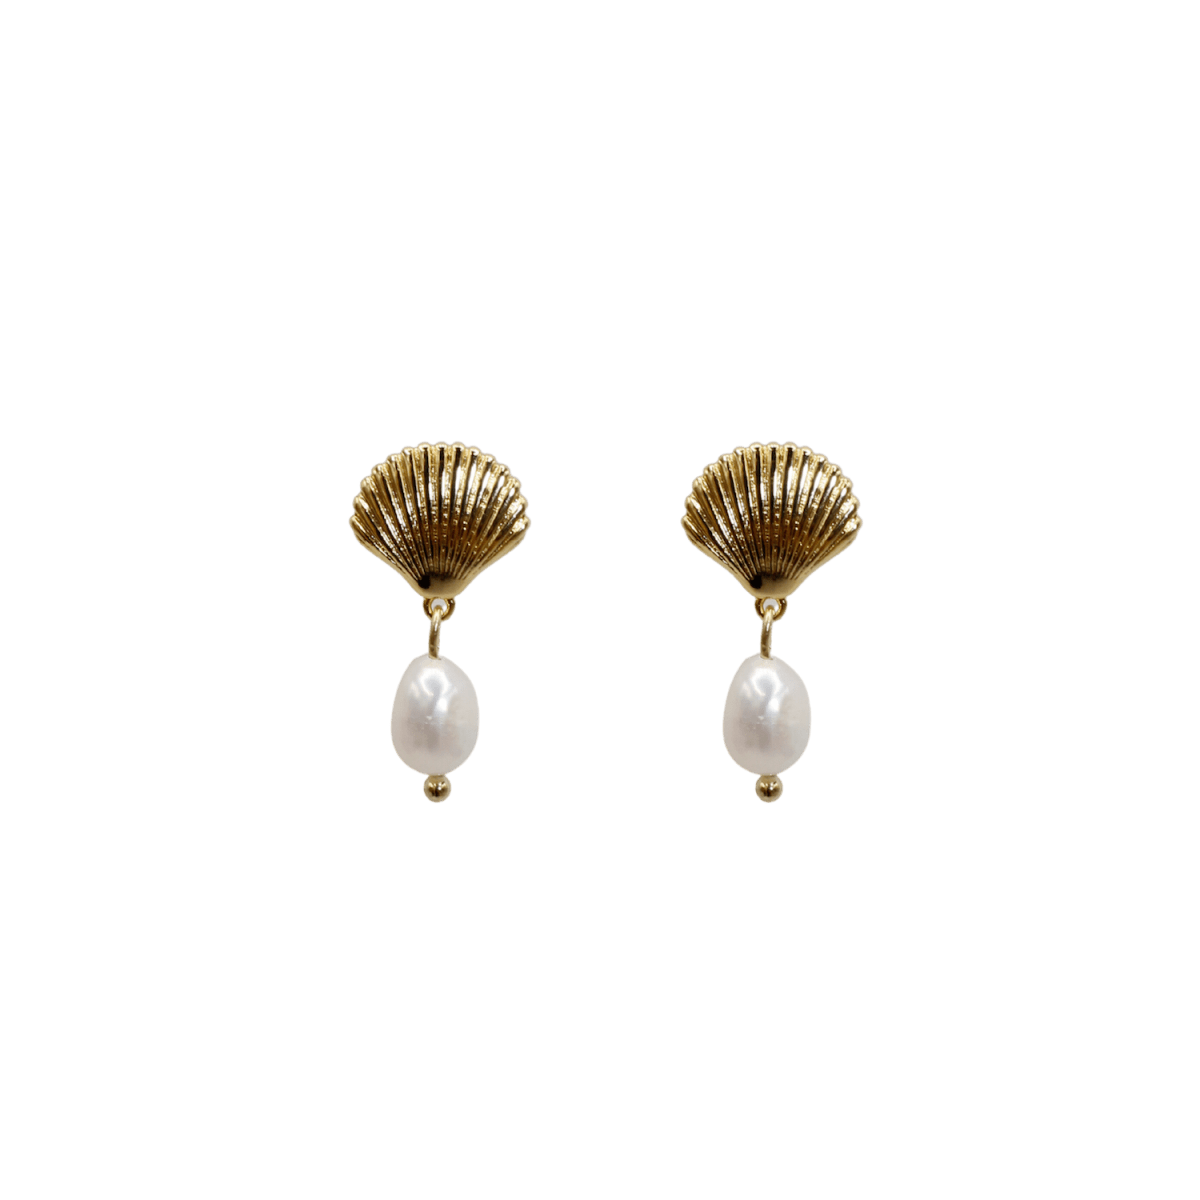 lilbobs.nl-mrsbobs-jewelry-earrings-shell-freshwater pearls